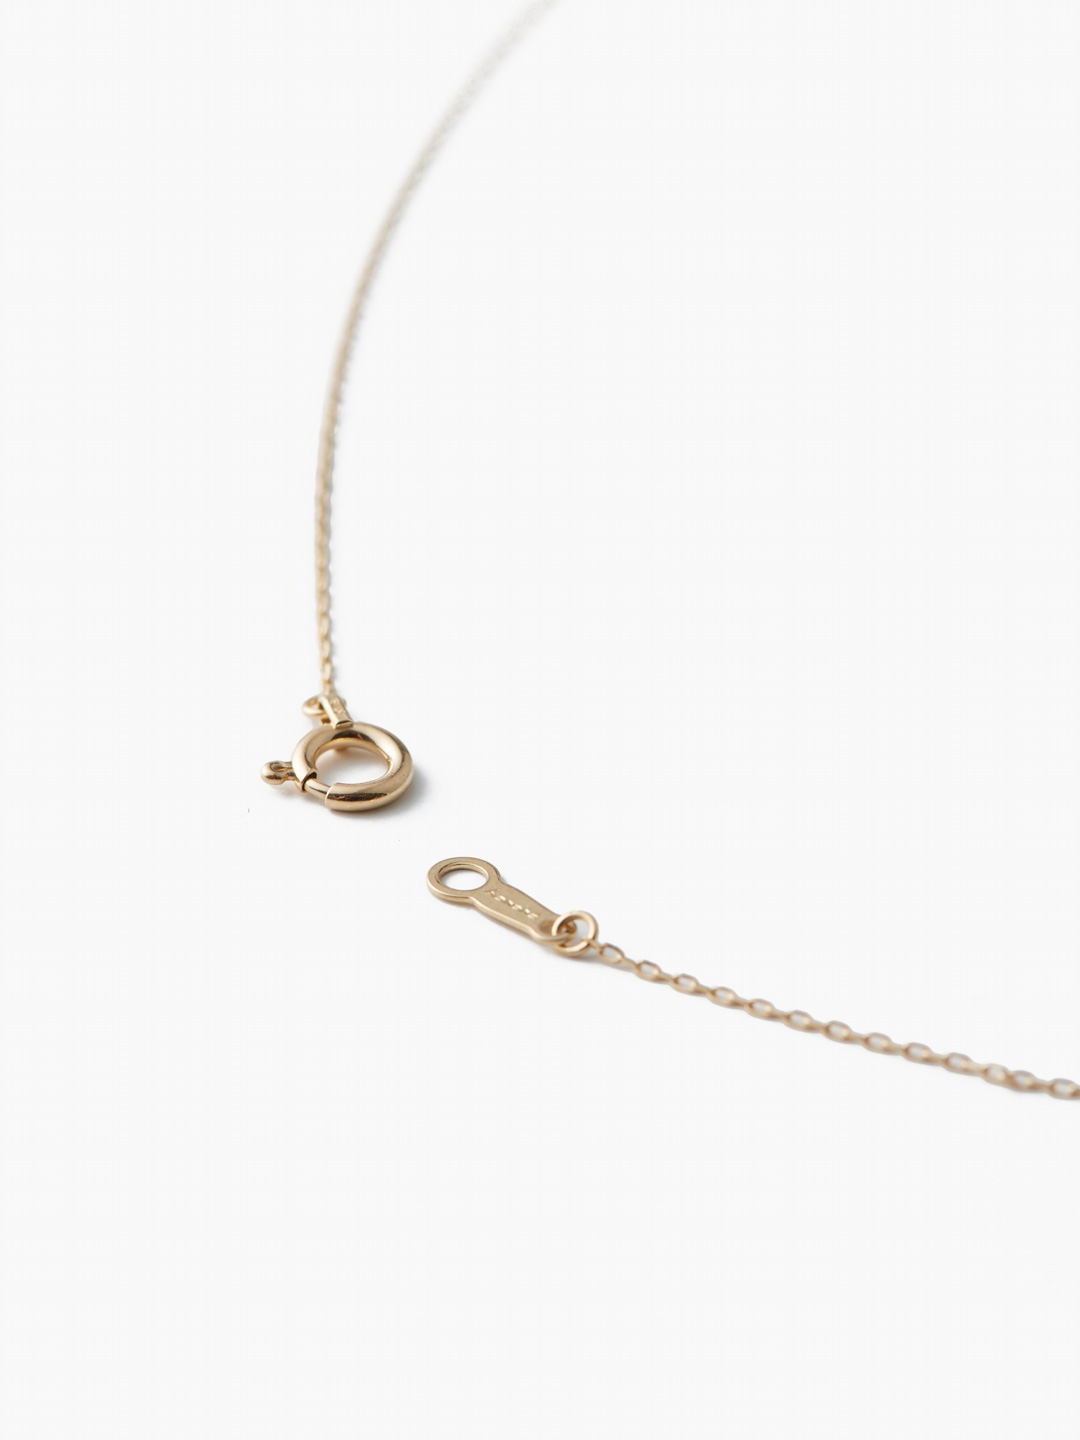 Necklace 赤サンゴ 40cm - Yellow Gold